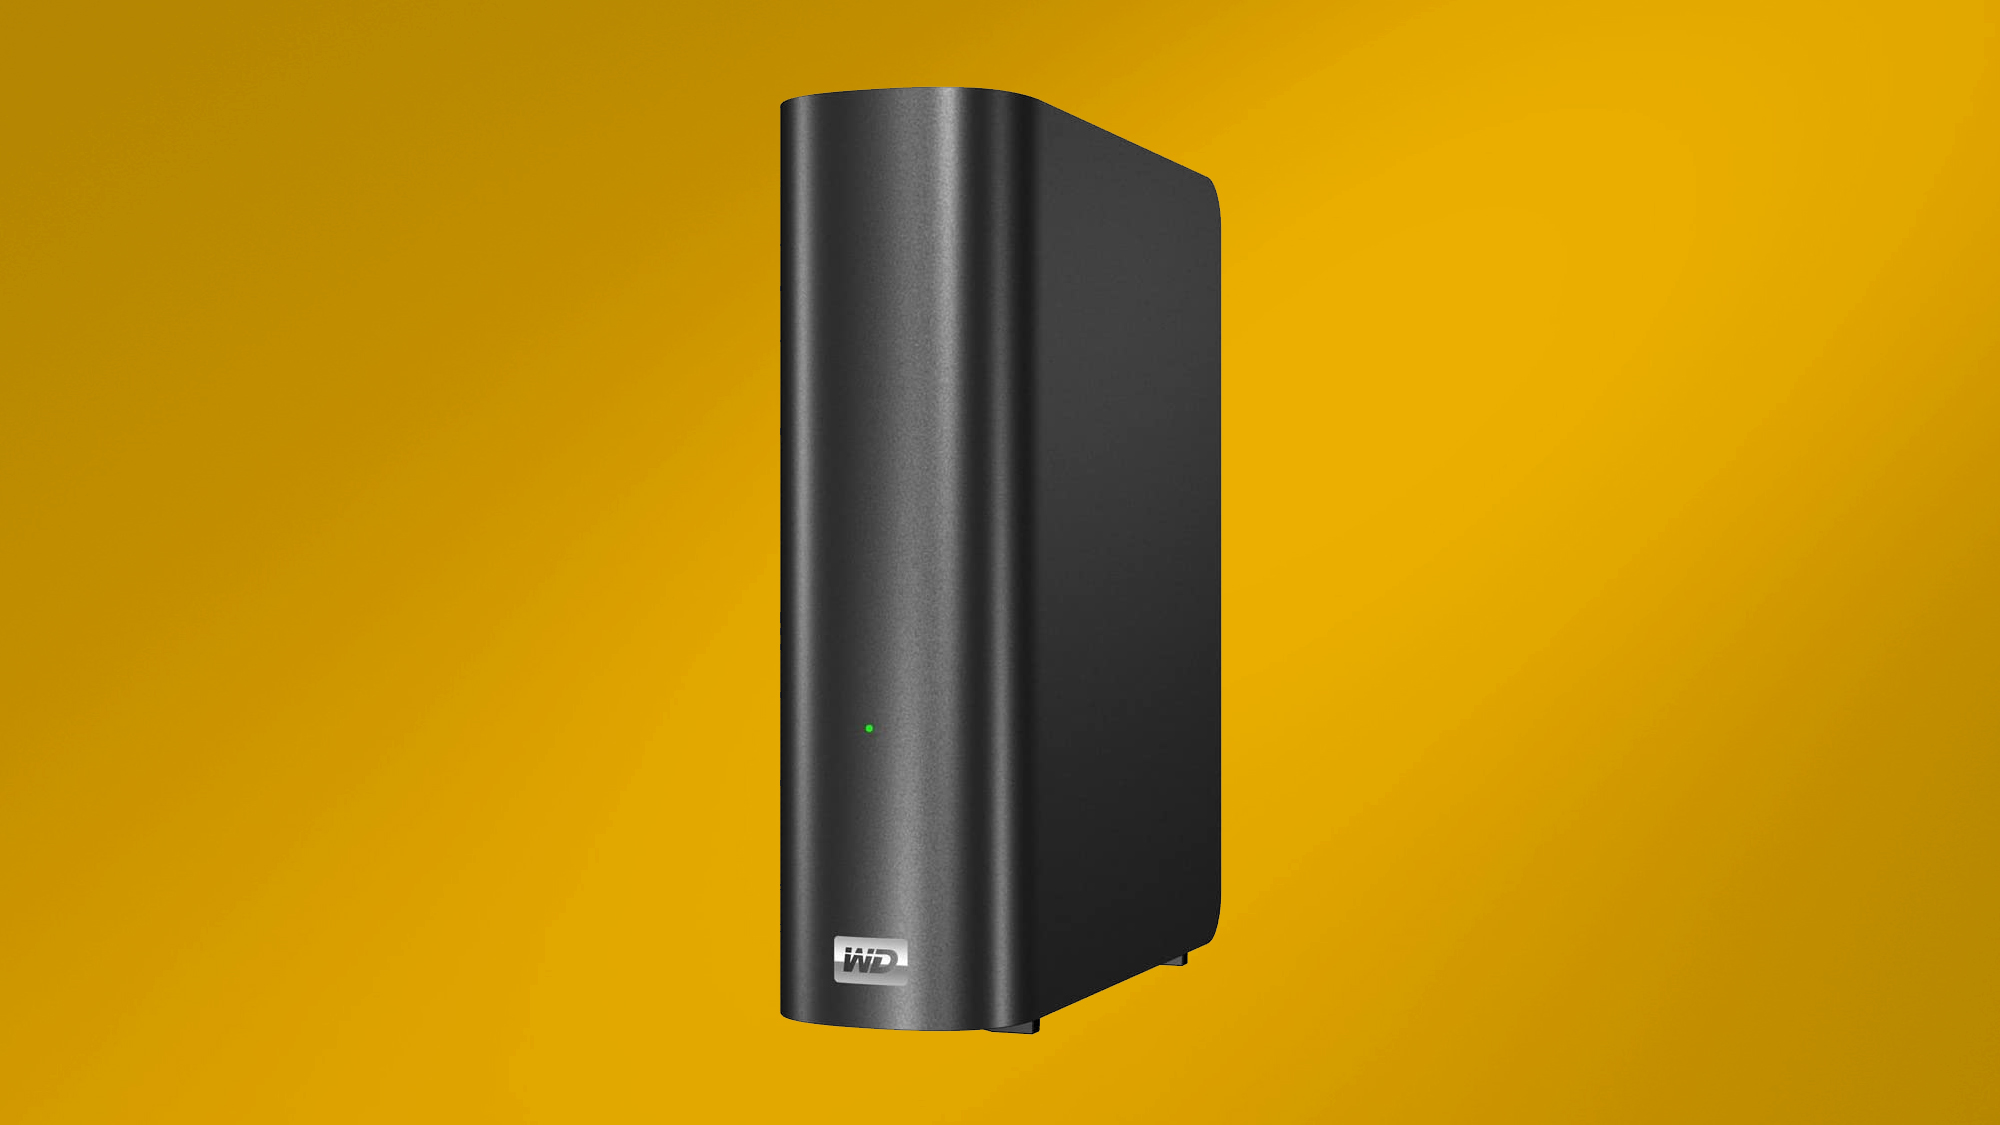 how to install wd my book external hard drive